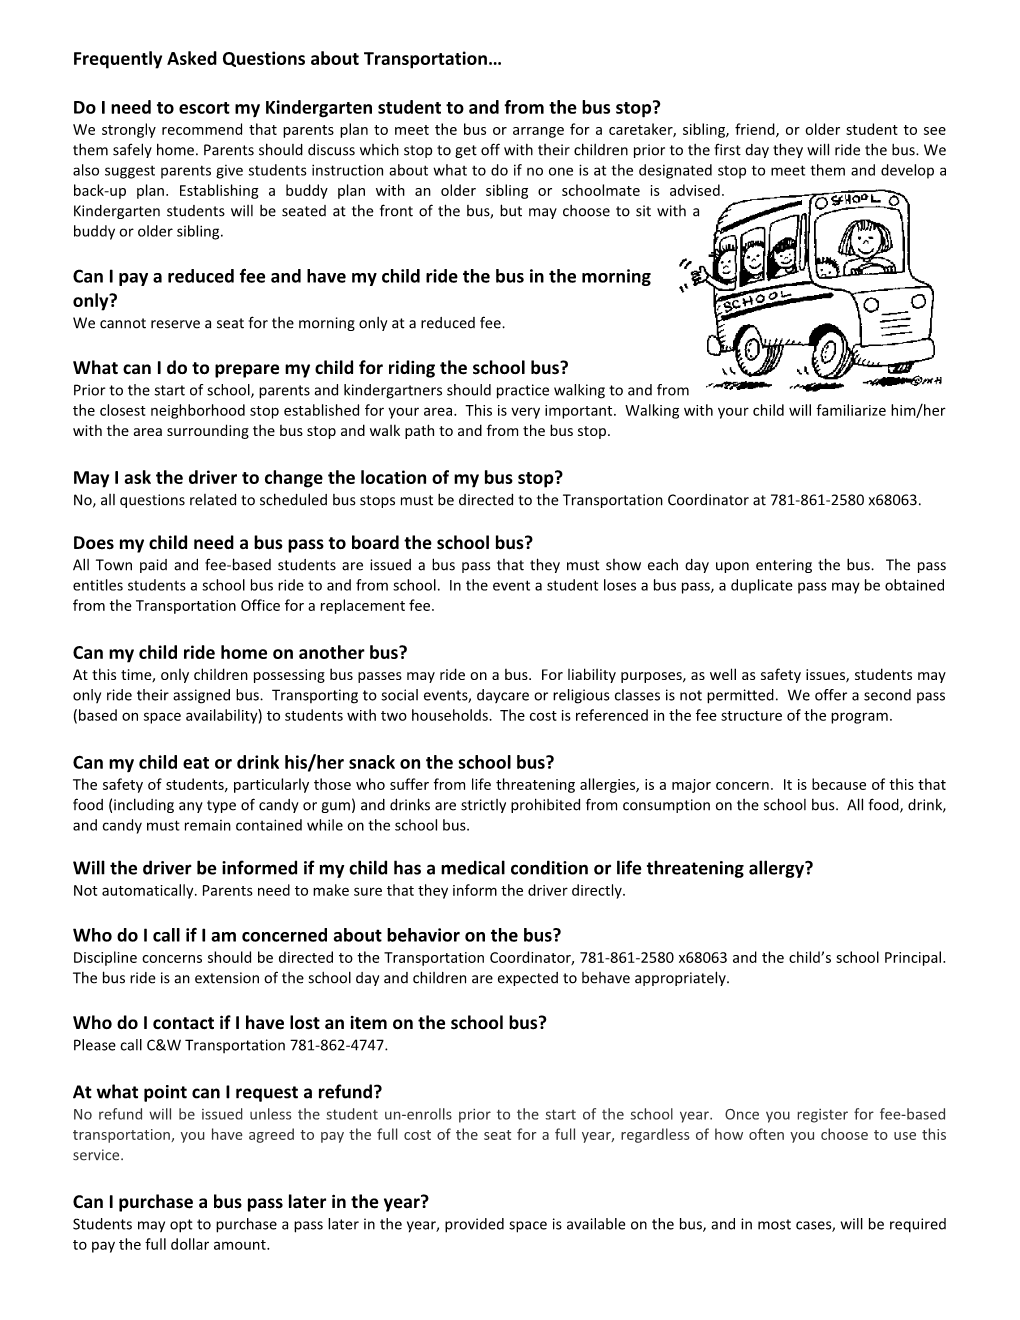 Frequently Asked Questions About Transportation